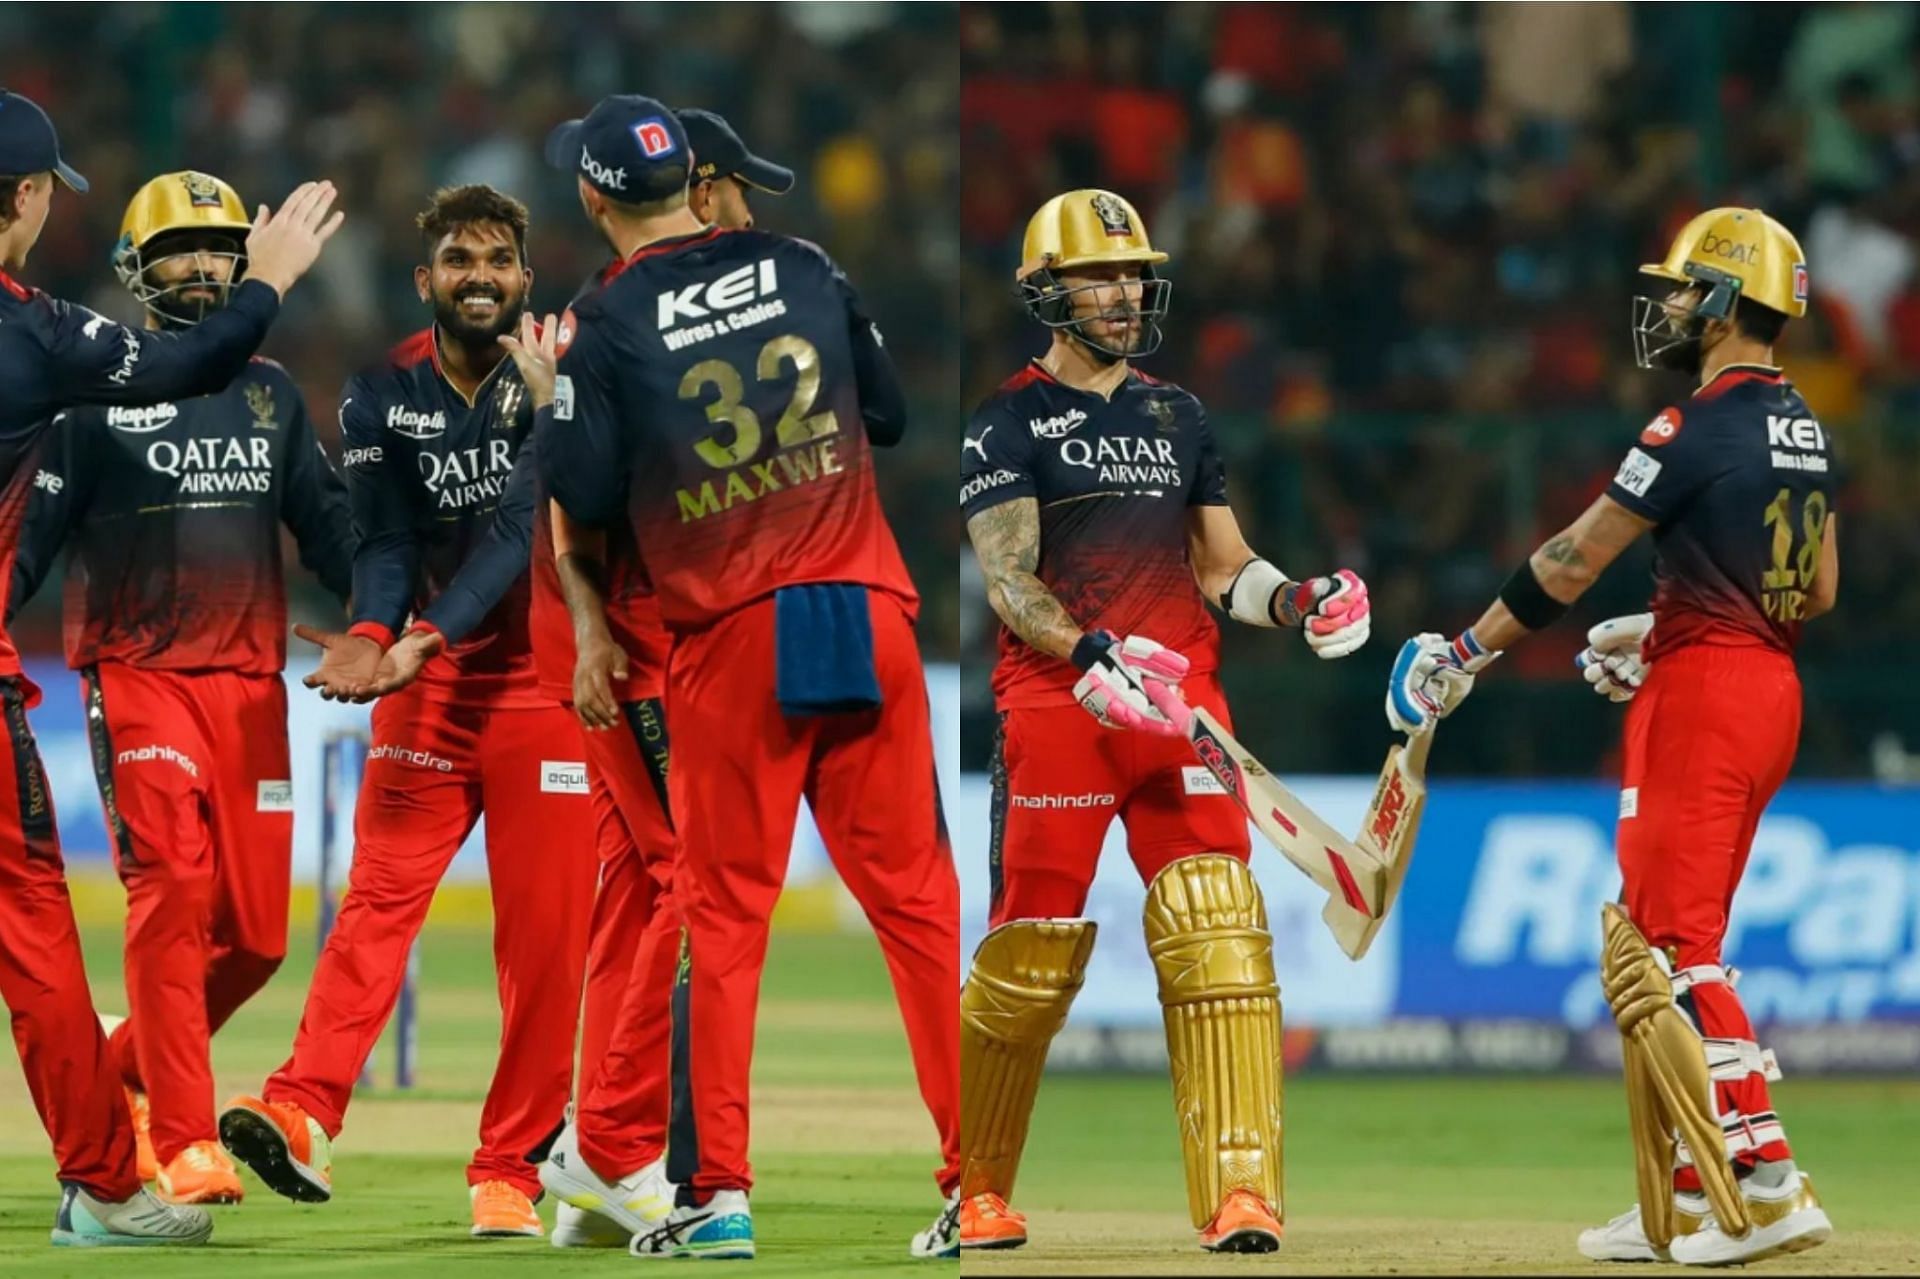 Royal Challengers Bangalore lost their previous game vs KKR [IPLT20]